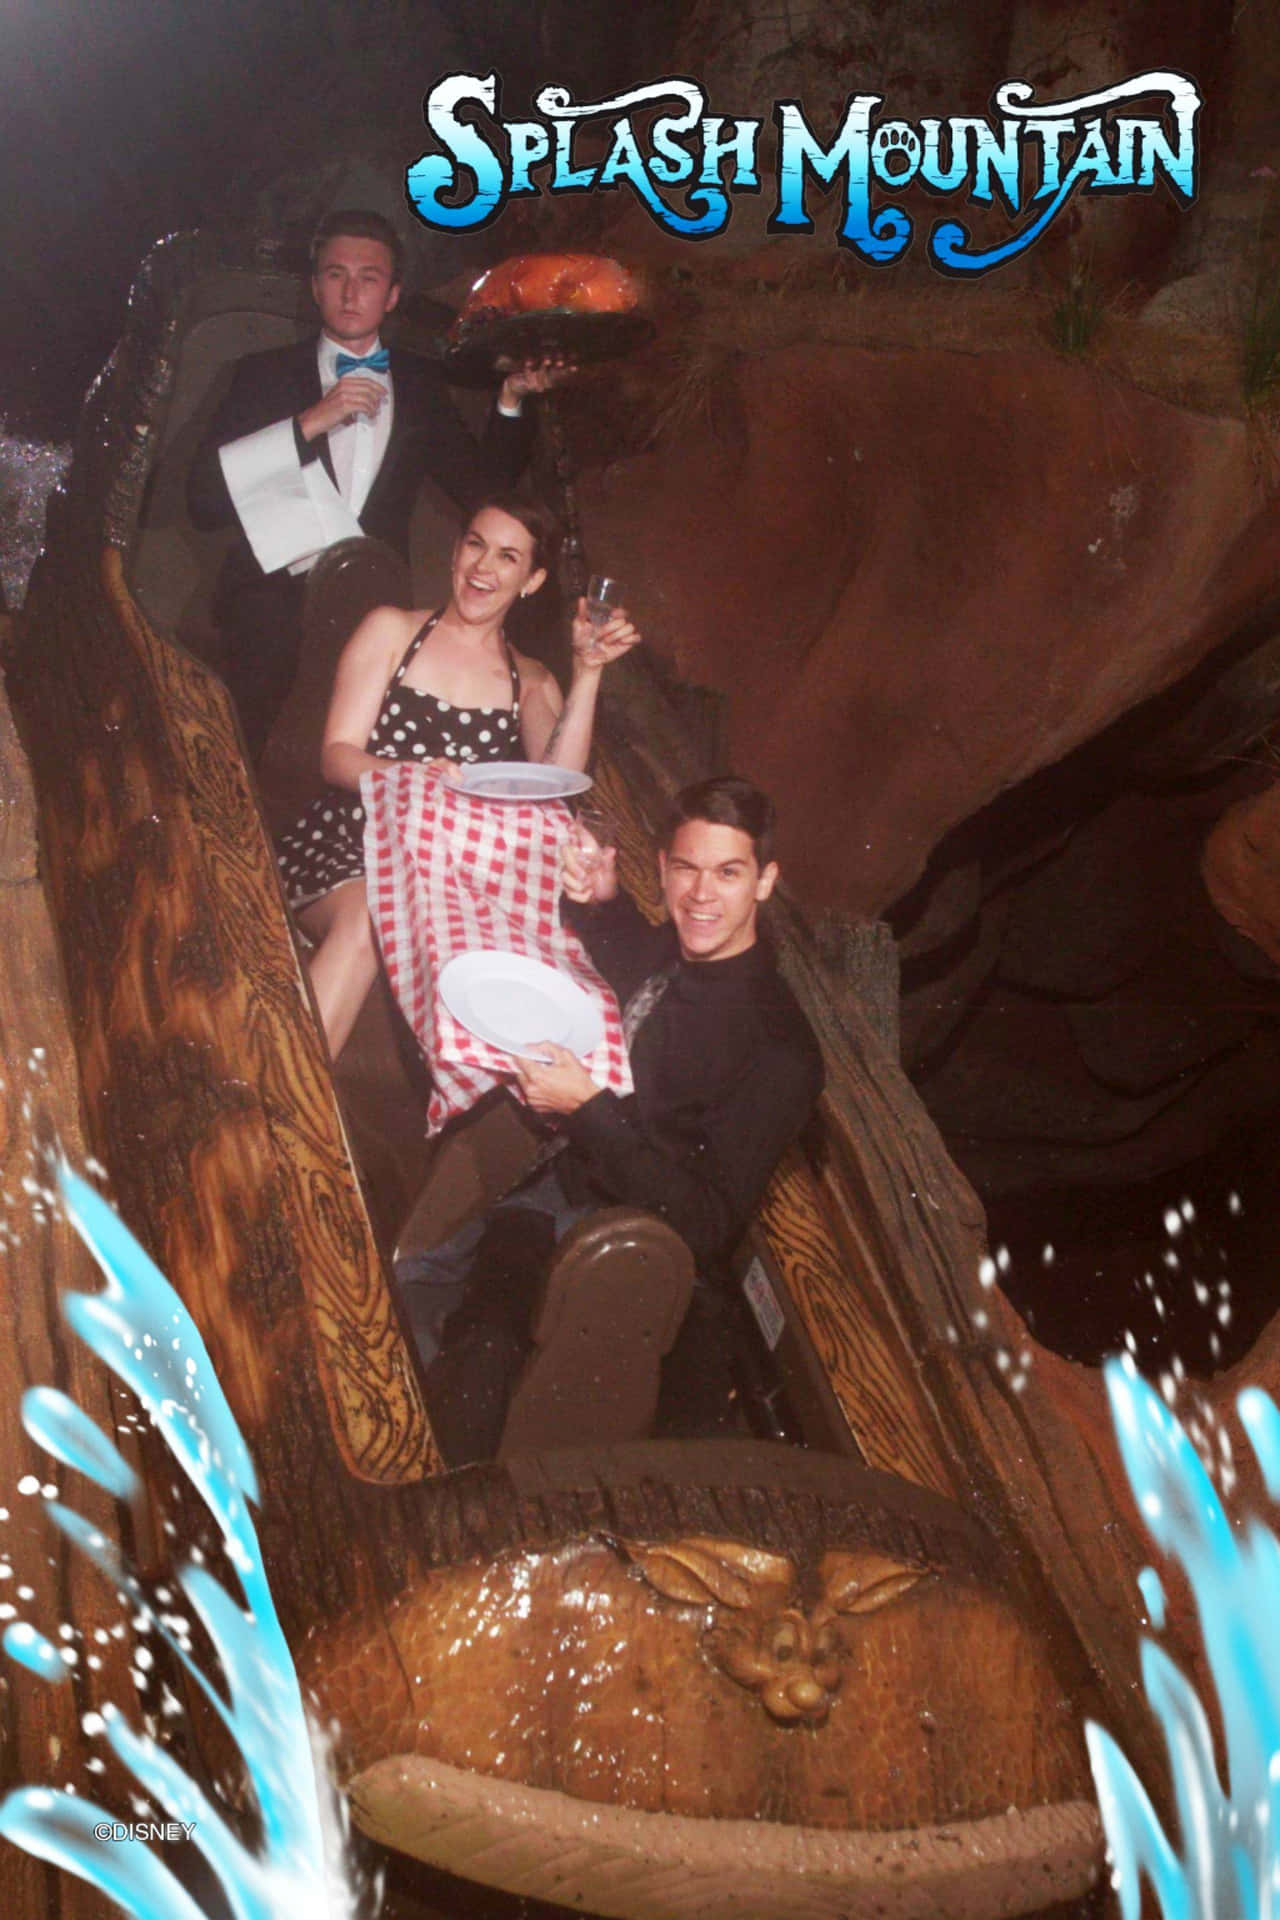 Splash Mountain - A Group Of People On A Ride